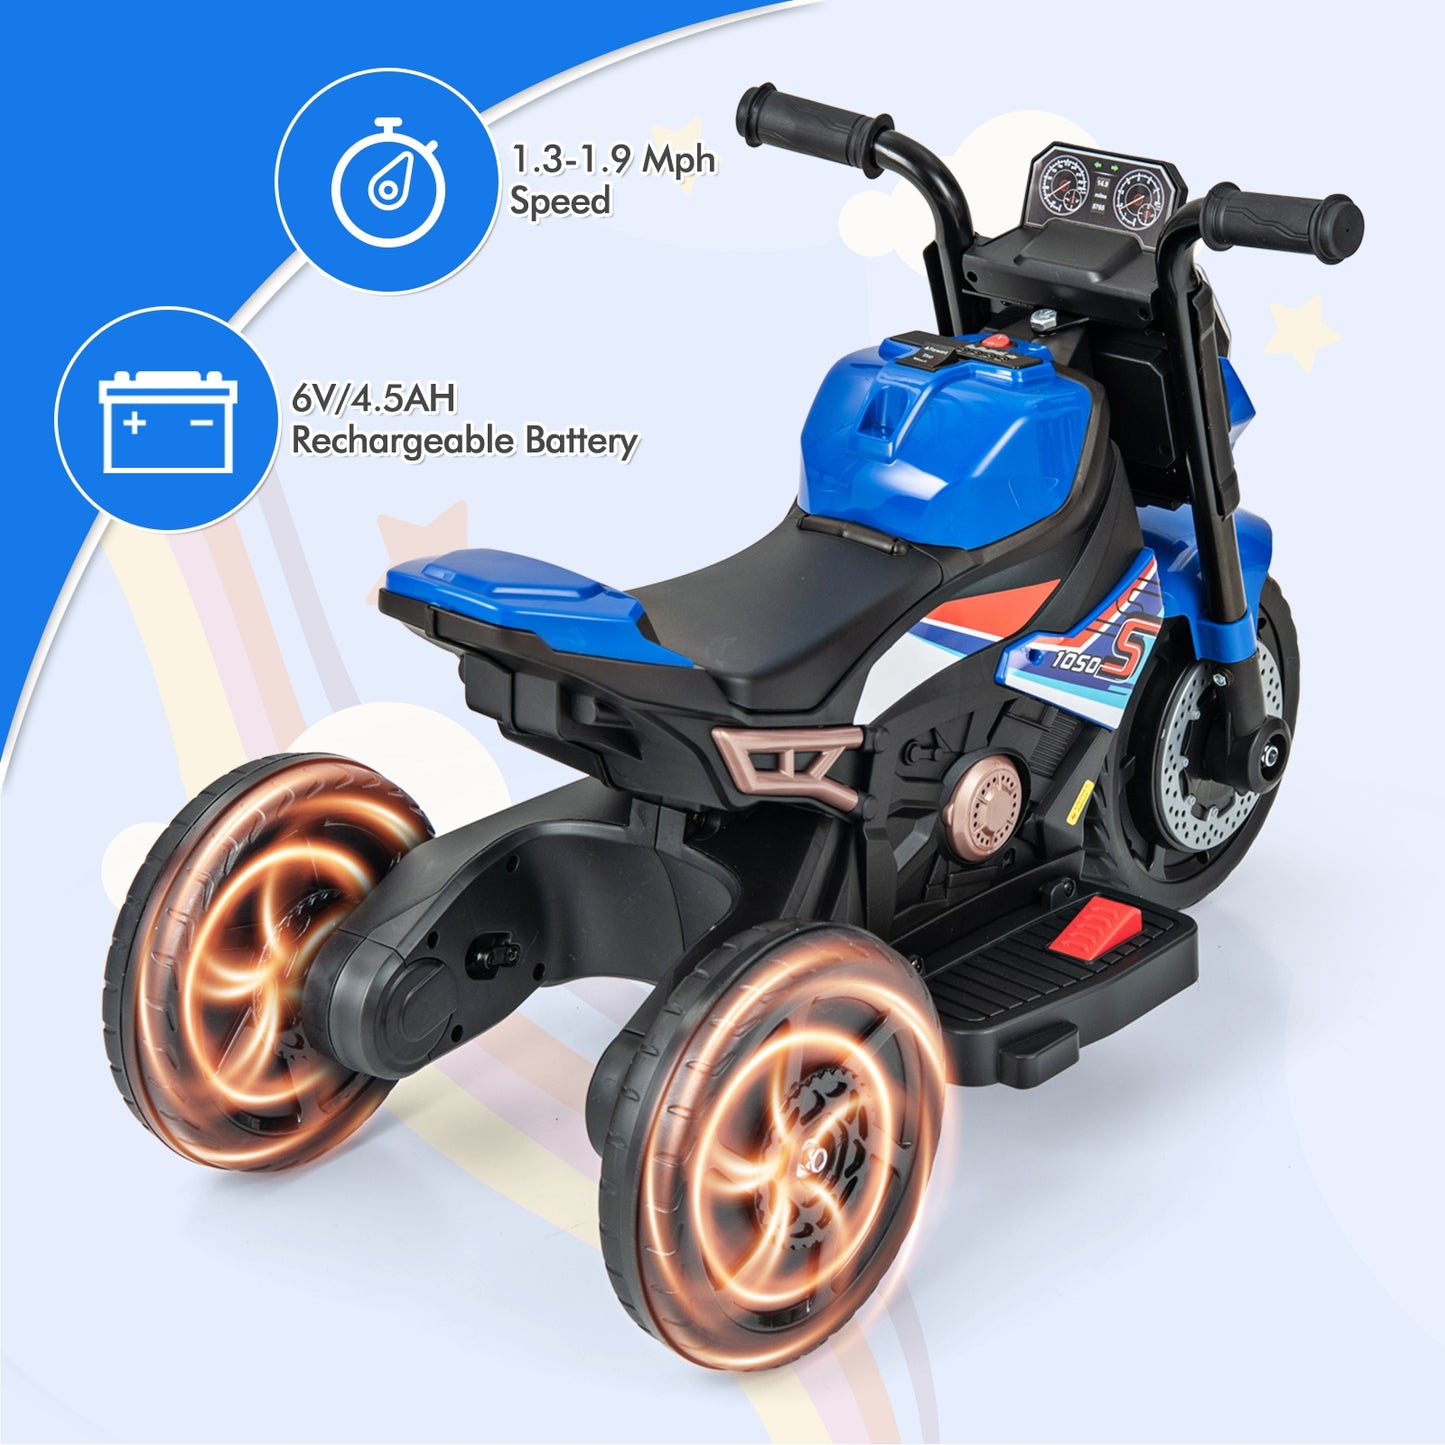 Kids Ride-on Motorcycle 6V Battery Powered Motorbike with Detachable Training Wheels-Blue